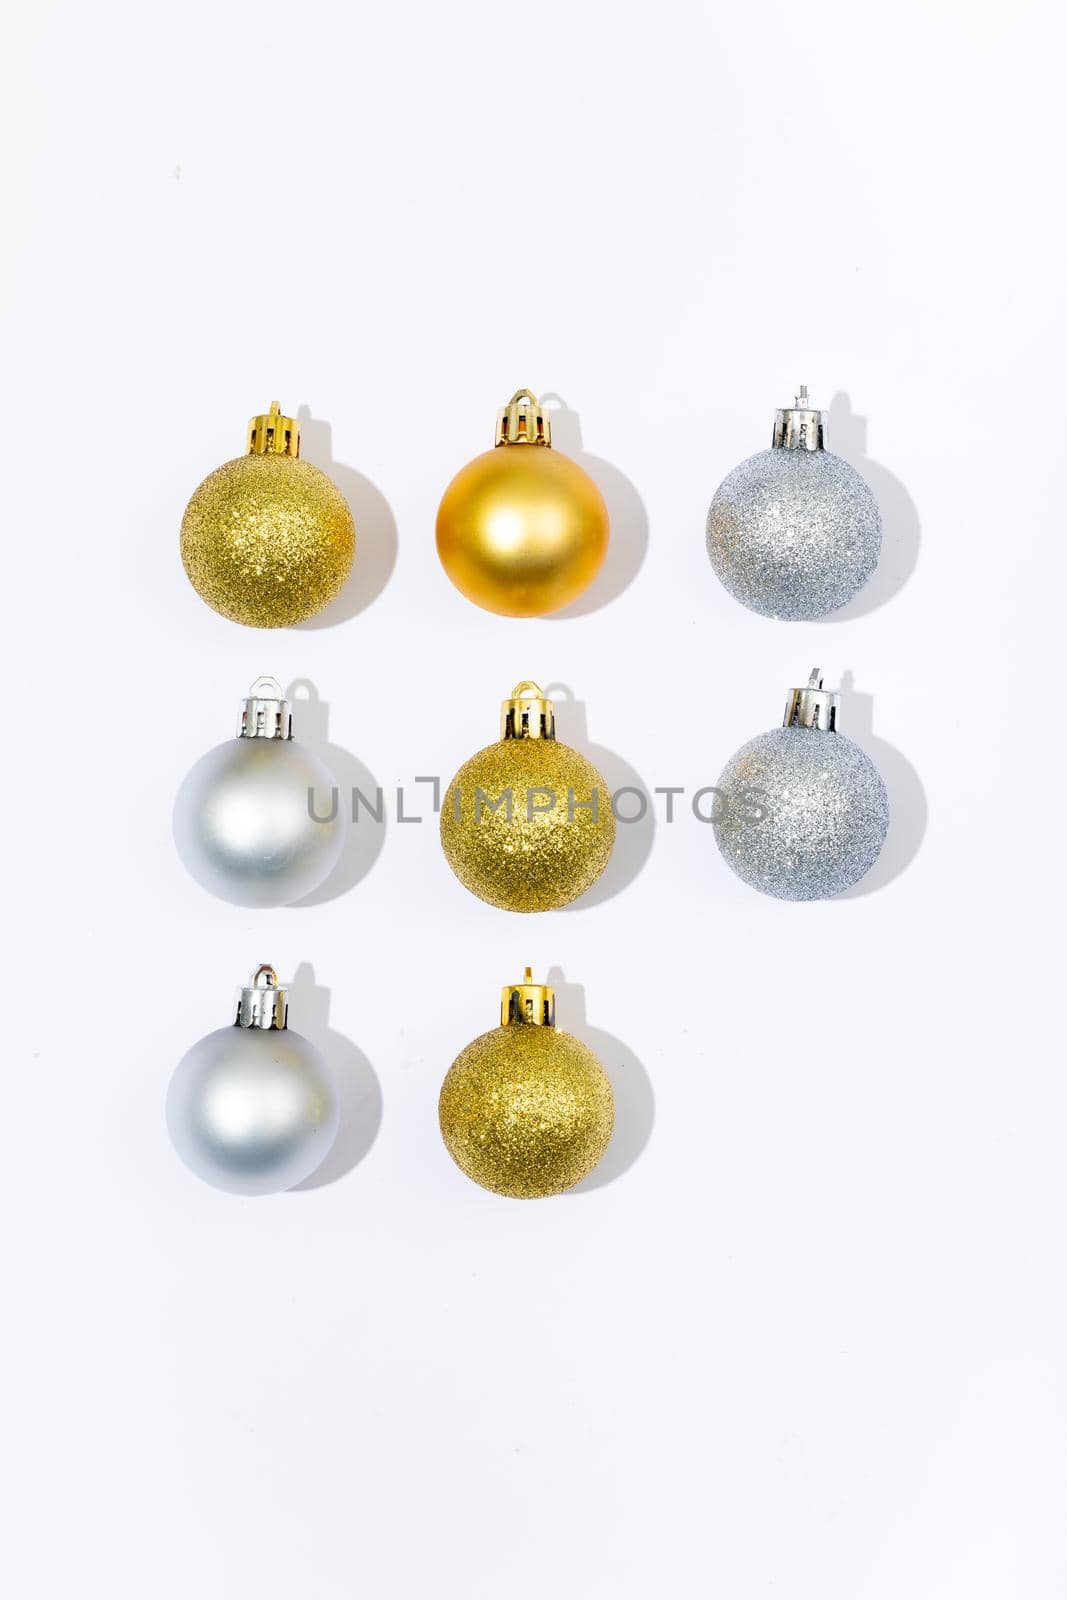 Composition of three gold and silver baubles on white background by Wavebreakmedia